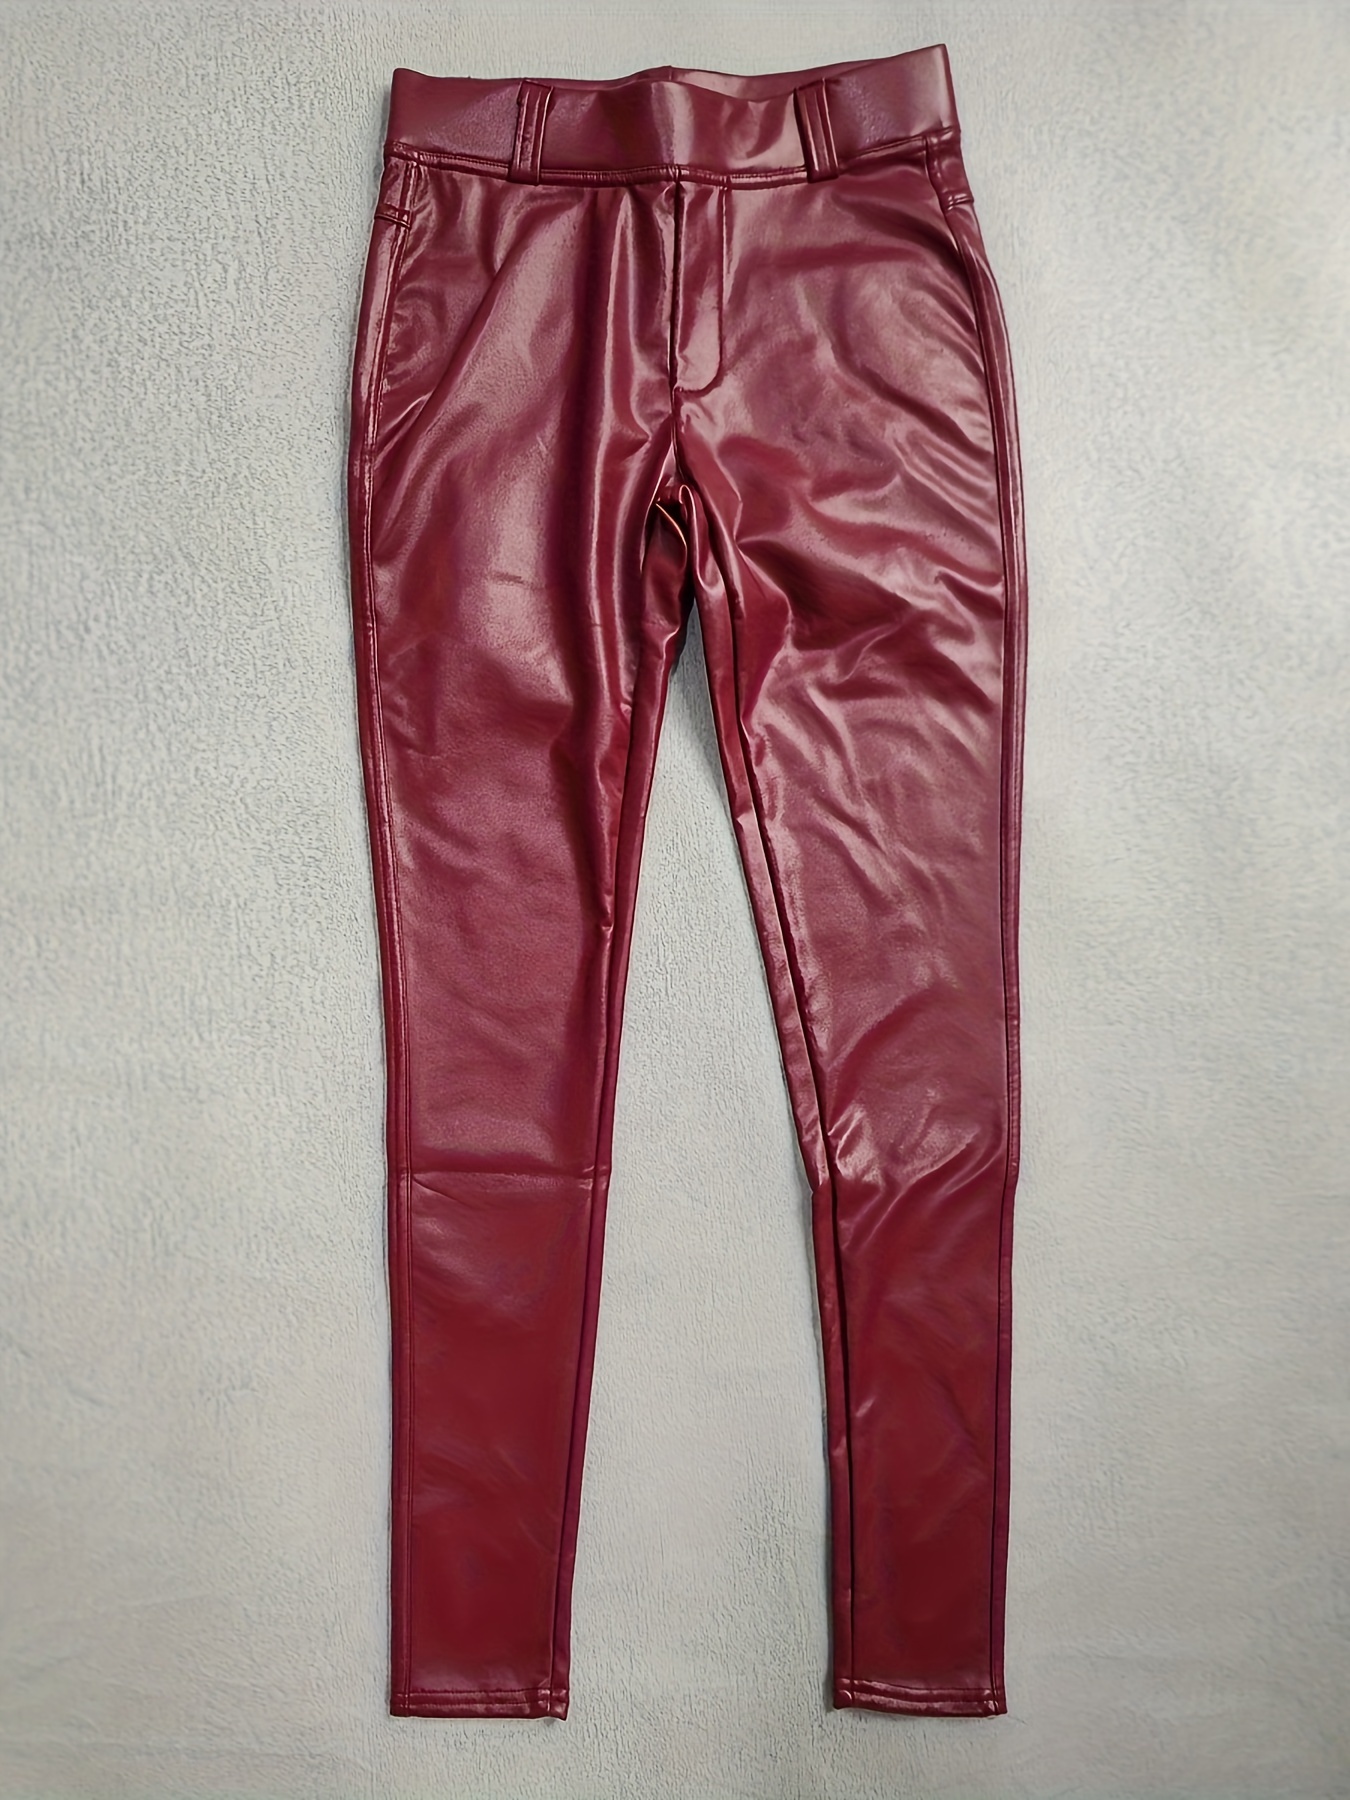  Red Faux Leather Leggings For Women High Waisted